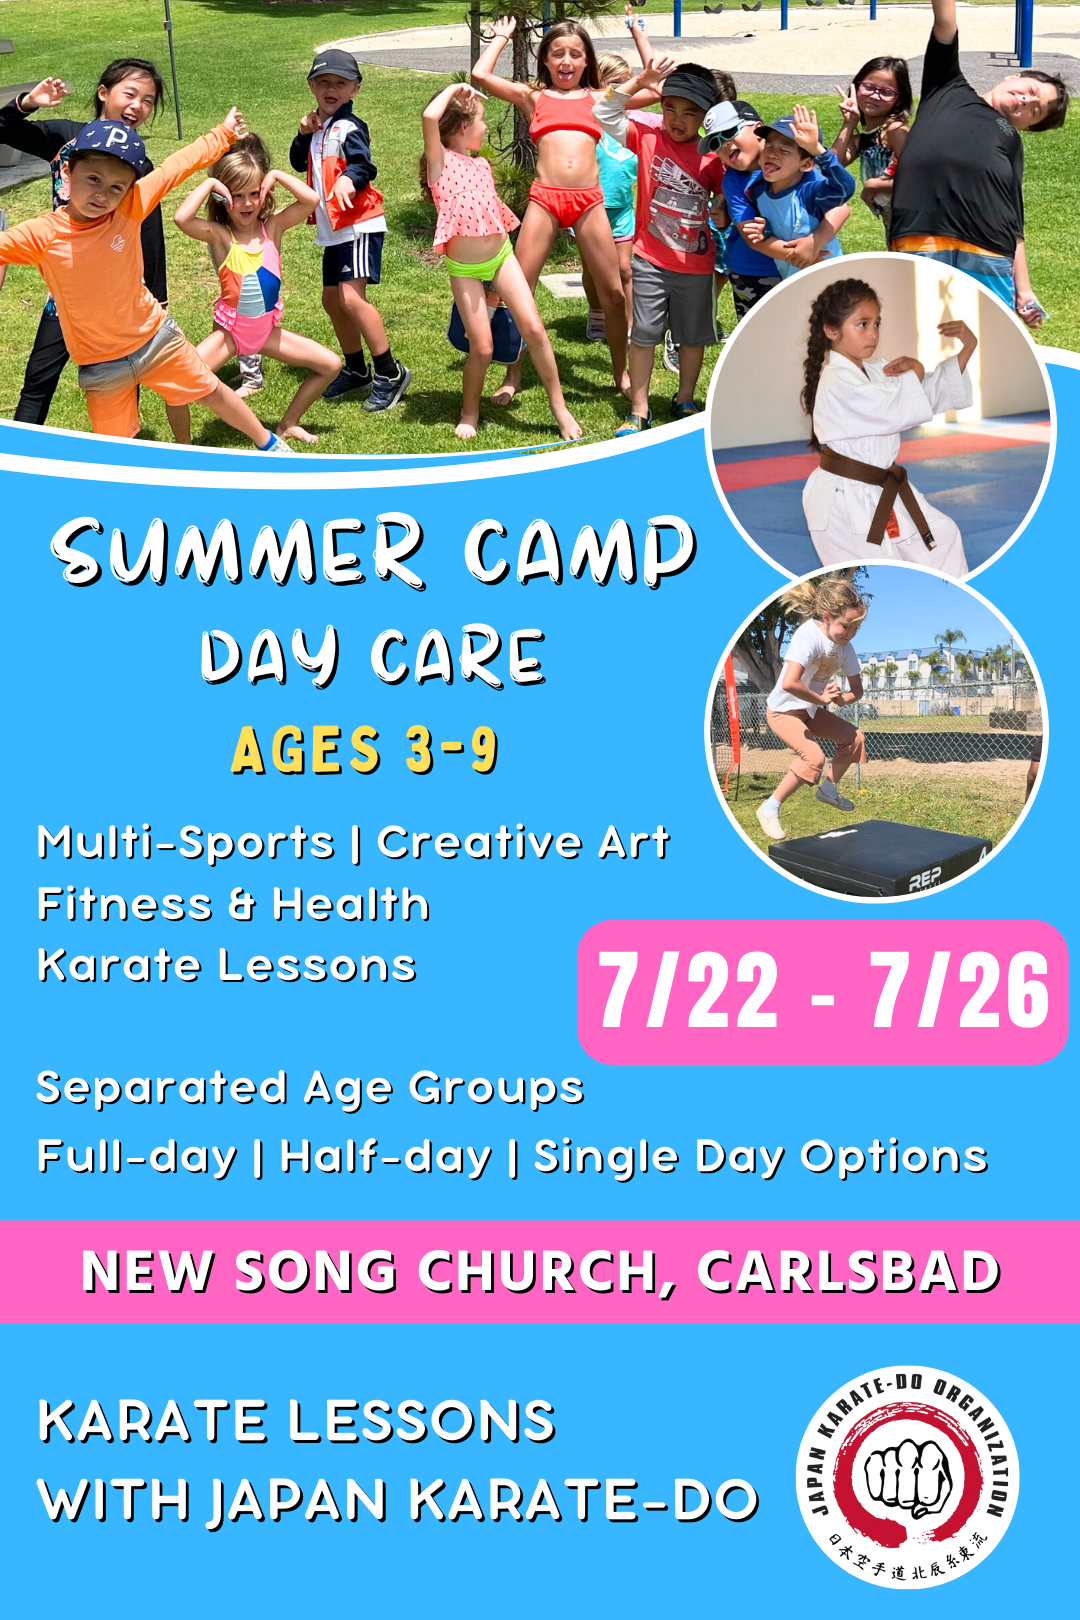 7/22 - 7/26 | Mon - Fri | 8:30 - 4:00<br>Multi-Sports, Art, and Karate<br>New Song Church, Carlsbad<br>Ages 3-9 | Separated Age Groups